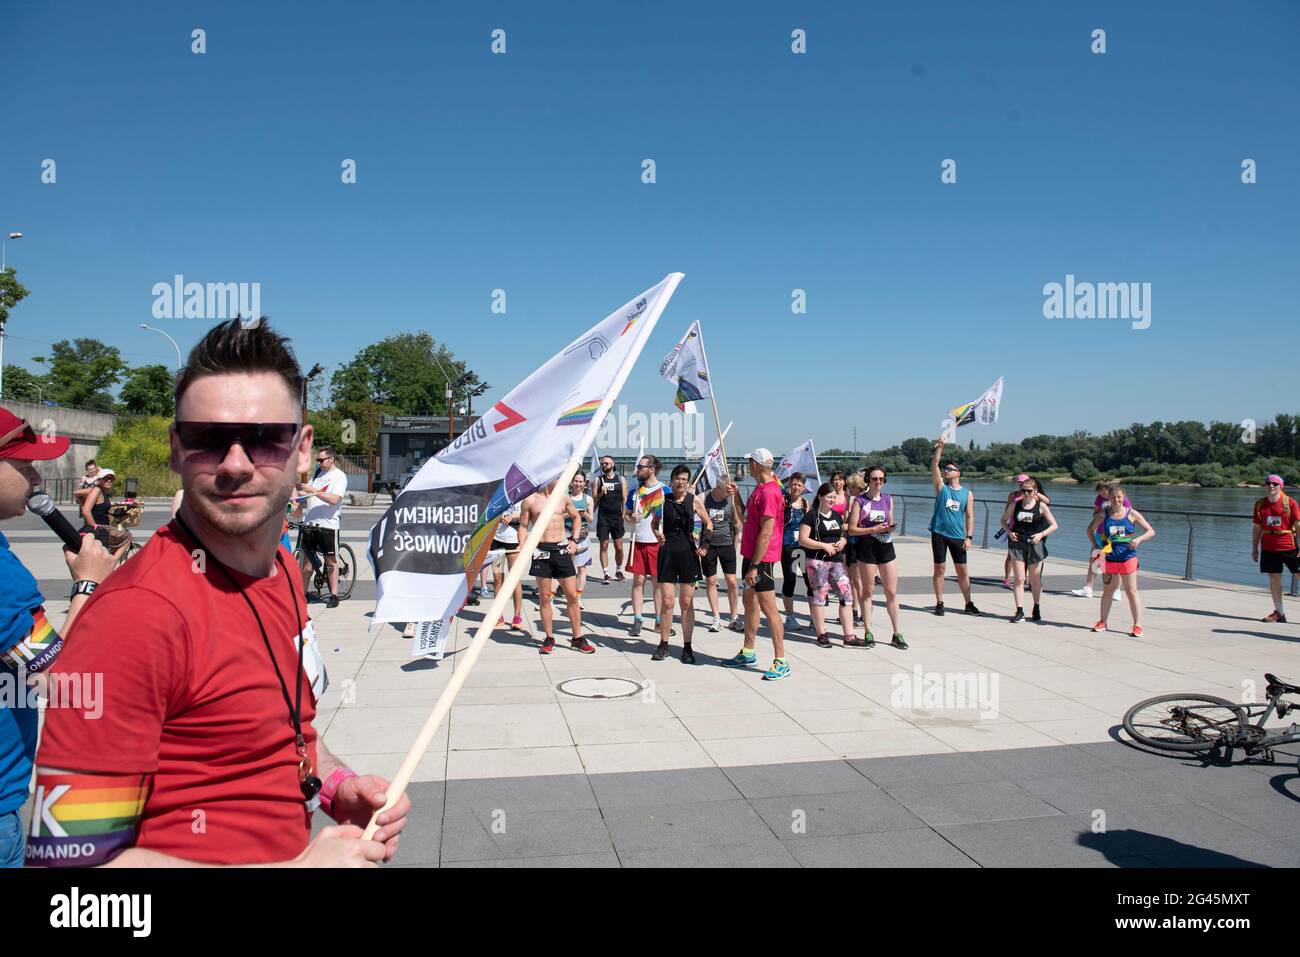 Warsaw, Warsaw, Poland. 19th June, 2021. Participants of the Equality Jog are seen before the start of the run on June 19, 2021 in Warsaw, Poland. A dozen of people participated in the 2nd Equality Jog, organised by the activist group Homokomando, that consists in a 5 Km route and takes place before the Warsaw's Pride Parade. Credit: Aleksander Kalka/ZUMA Wire/Alamy Live News Stock Photo